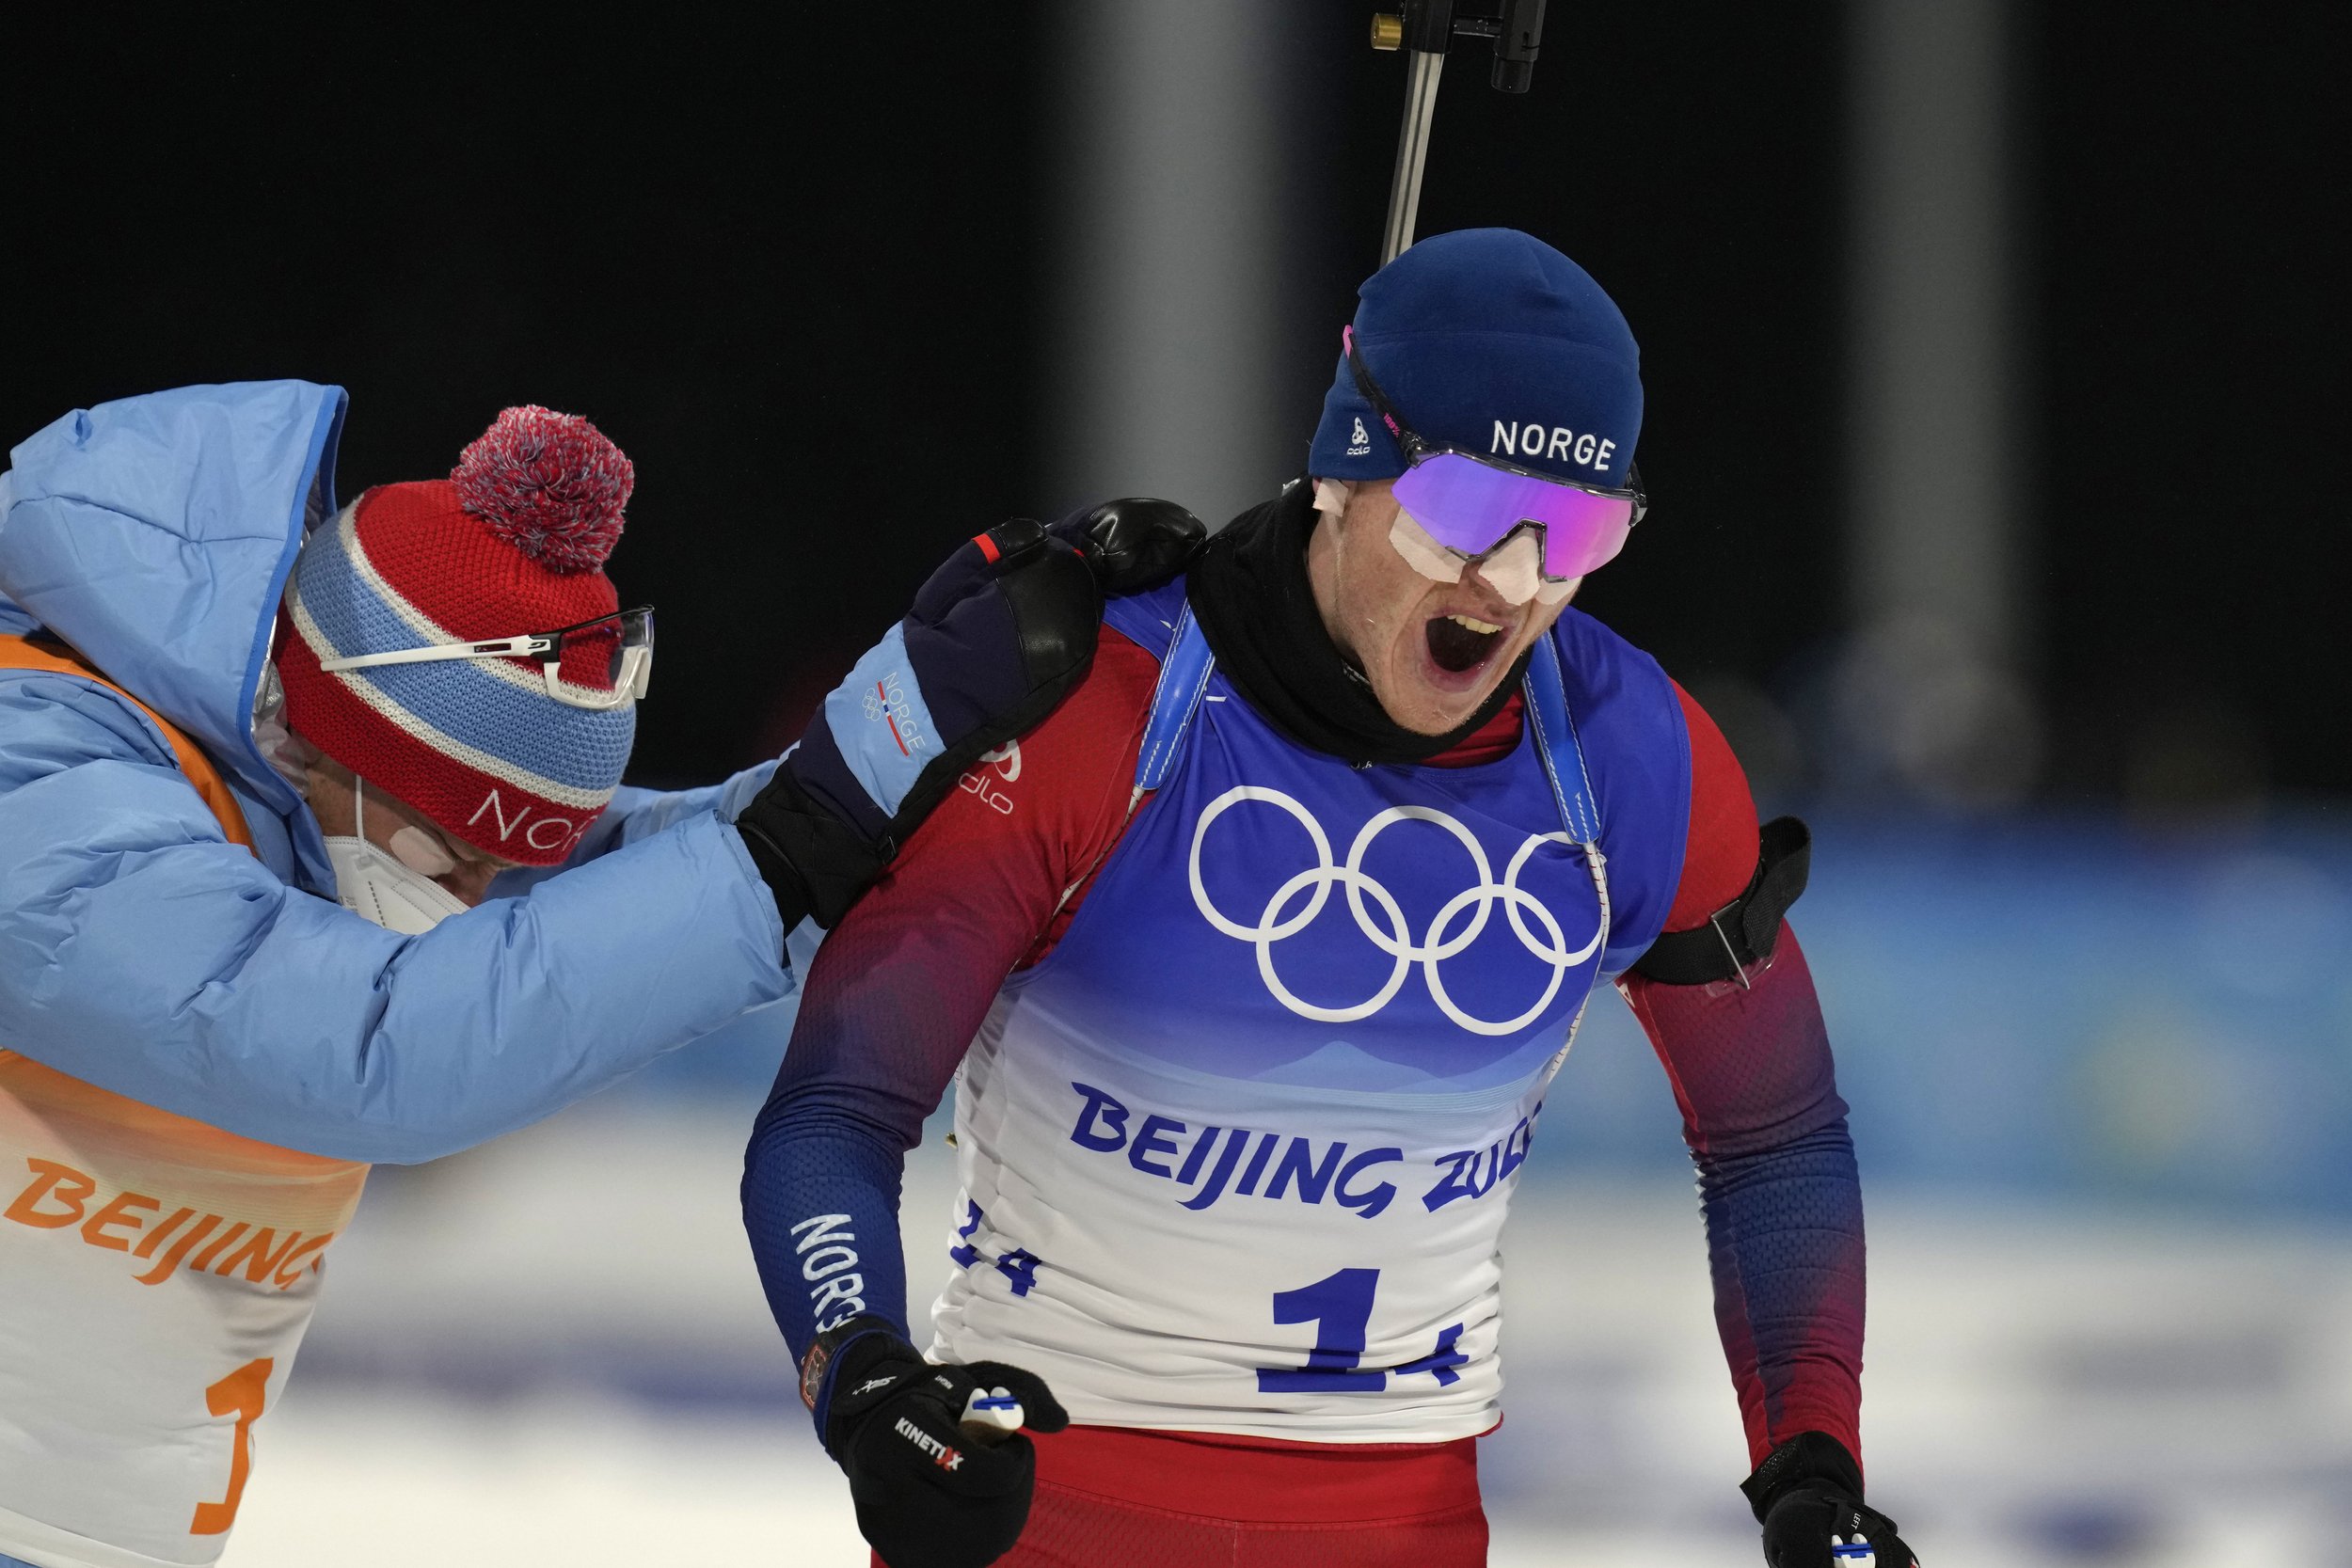  Johannes Thingnes Boe of Norway reacts after winning the biathlon 4x6-kilometer mixed relay at the 2022 Winter Olympics, Saturday, Feb. 5, 2022, in Zhangjiakou, China. (AP Photo/Kirsty Wigglesworth) 